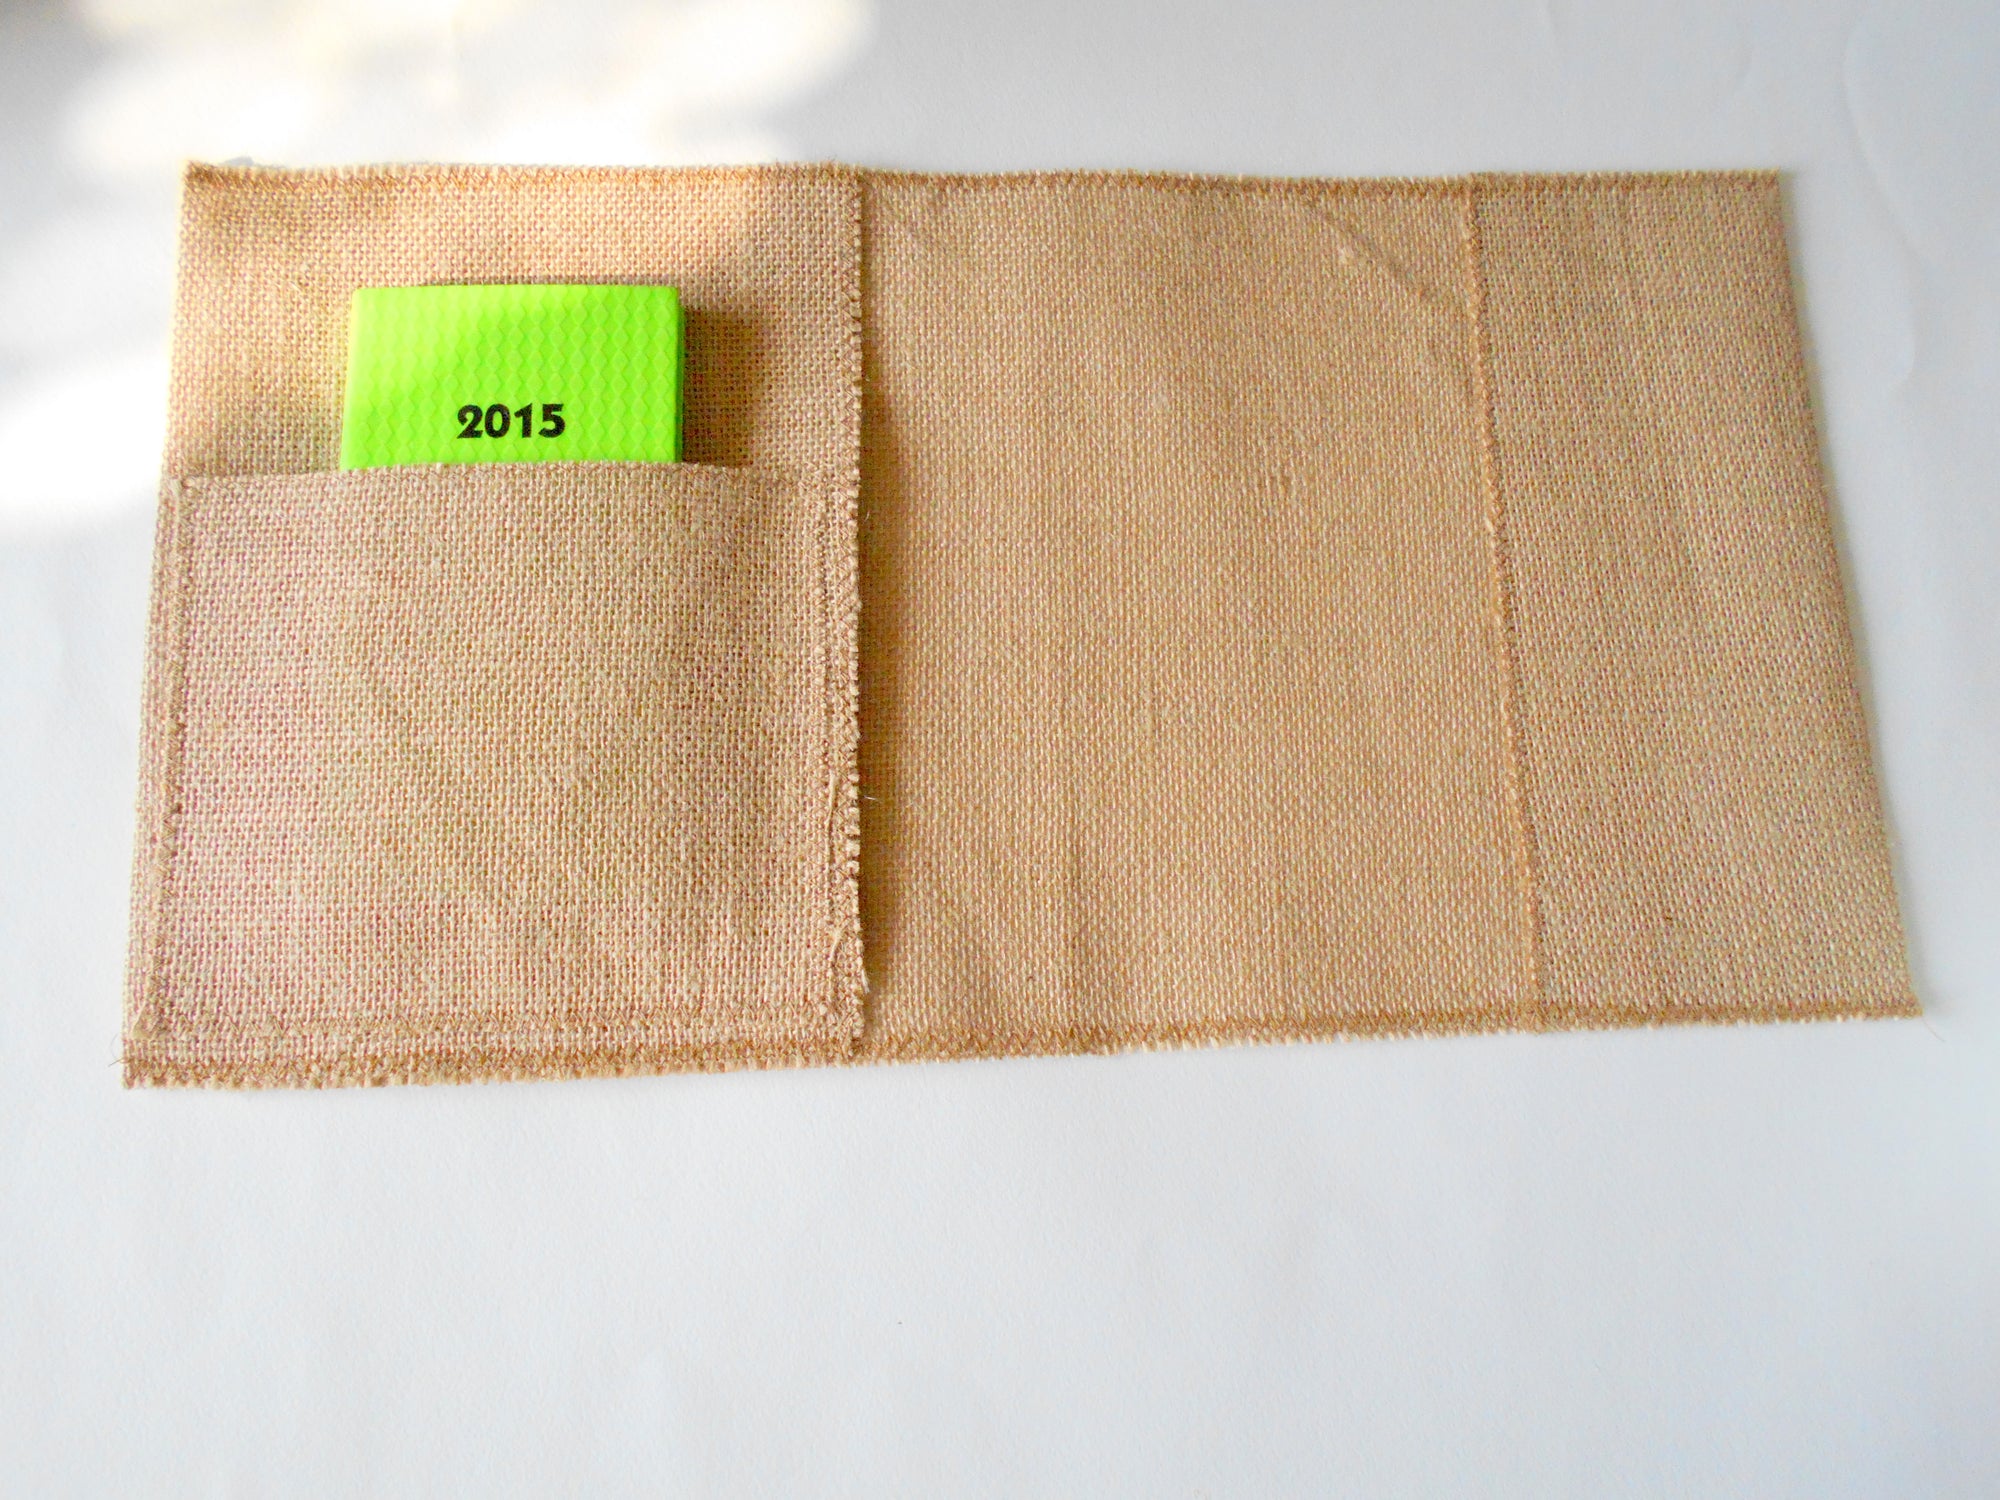 Burlap Book cover sewed with cotton threads- Organic eco friendly Book fabric case with a pocket for small objects- Rustic book folder case